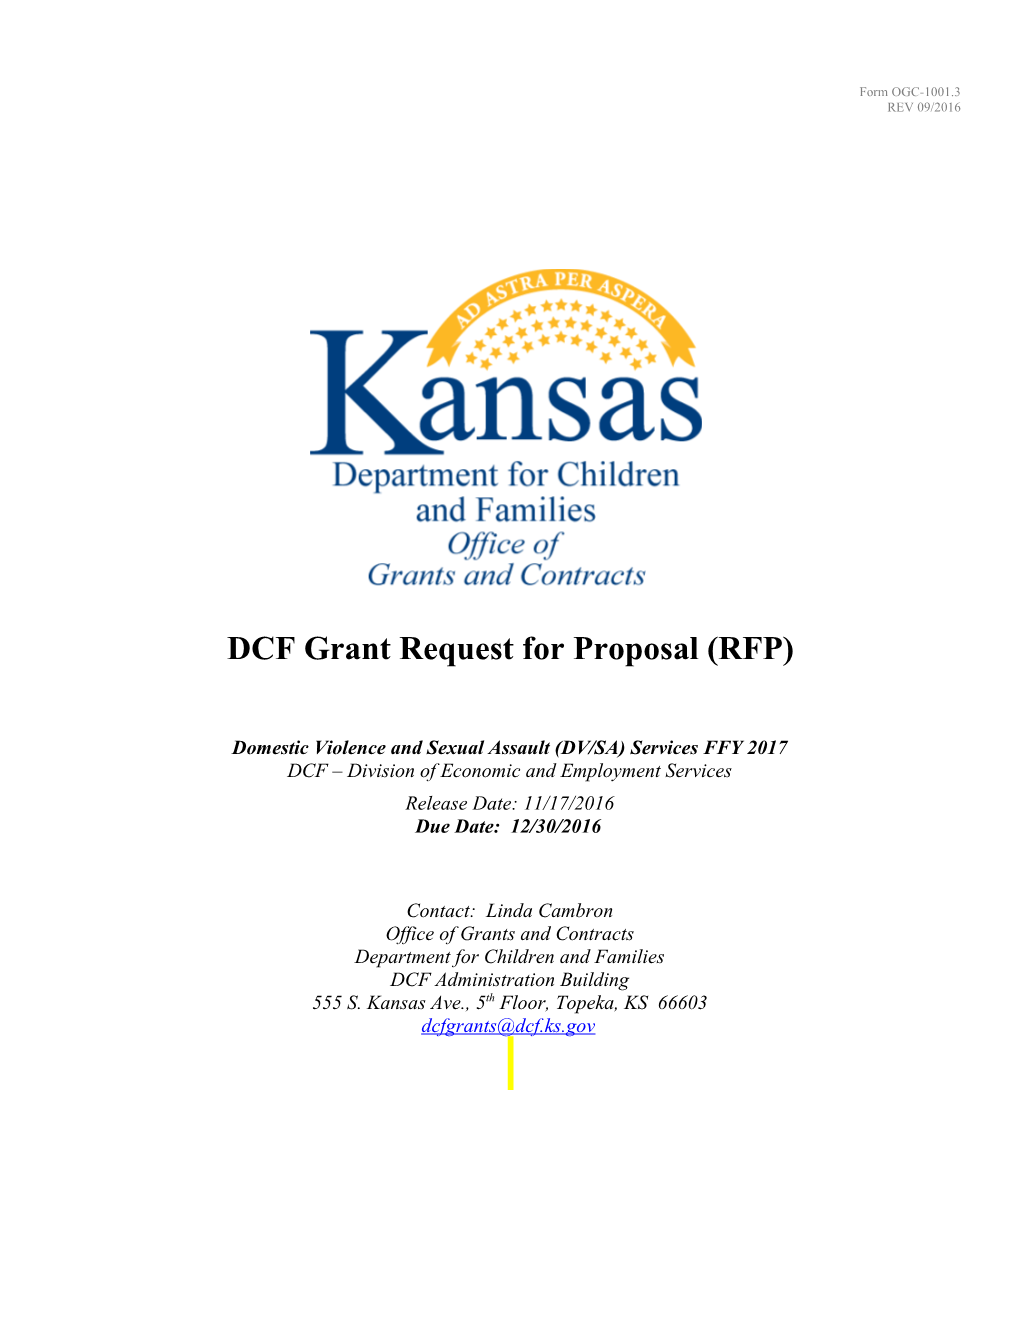 DCF Grant Request for Proposal (RFP)